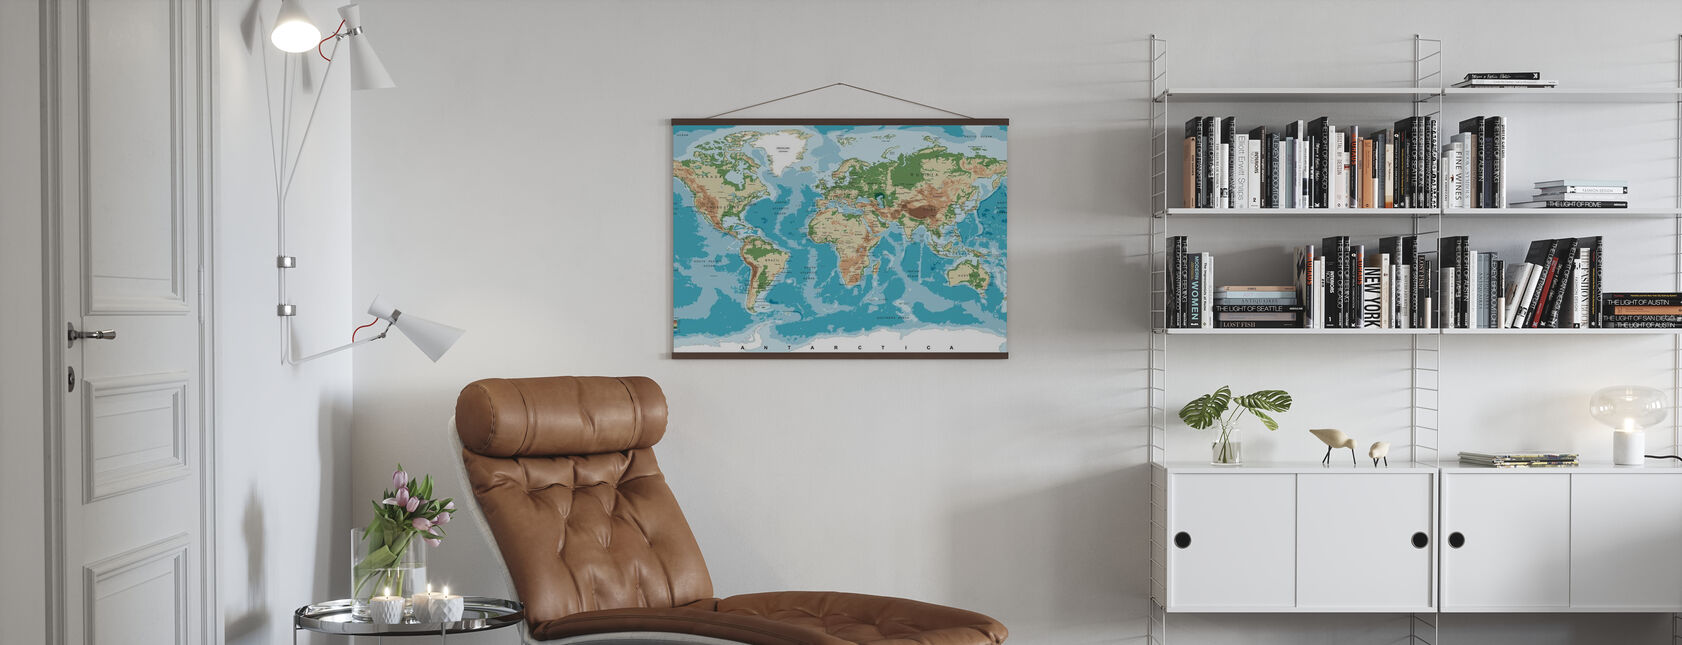 World Map with Elevation Tints - Poster - Living Room